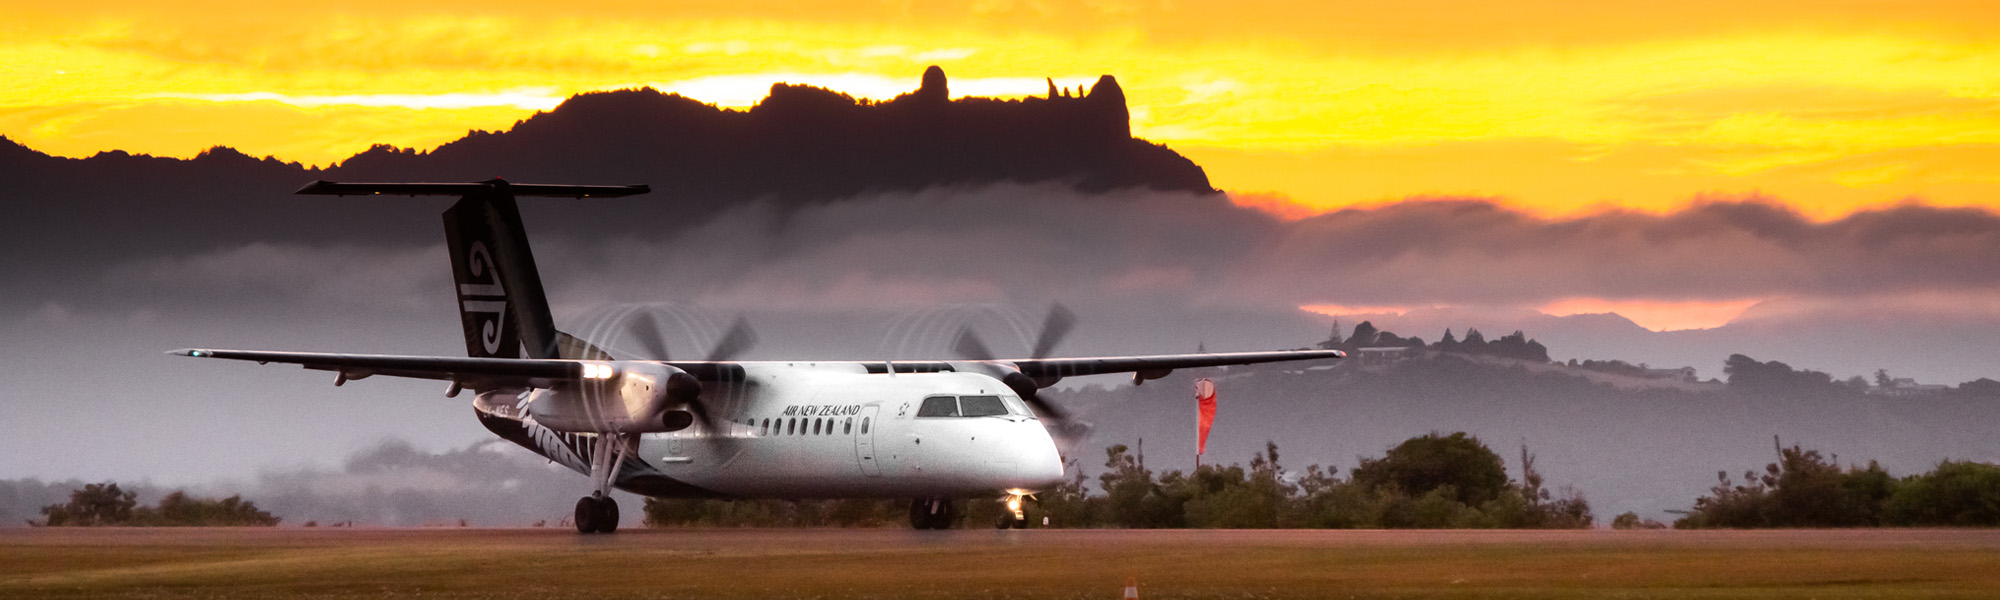 Plane on the tarmac at the Whangārei airport with Mount Manaia and the sun in the background. 